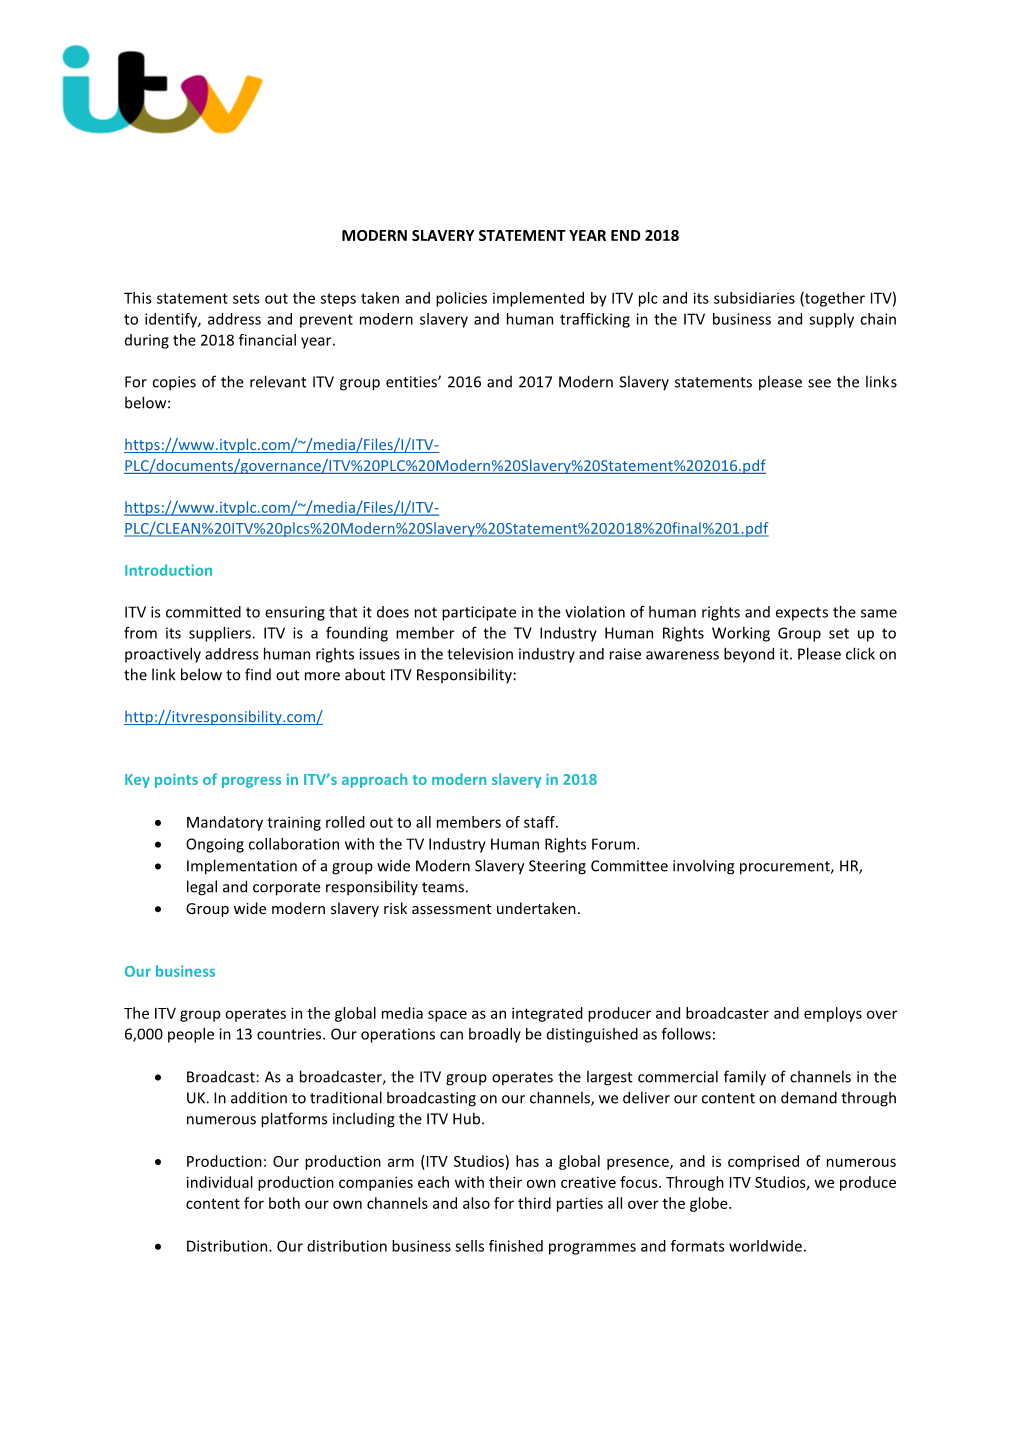 MODERN SLAVERY STATEMENT YEAR END 2018 This Statement Sets out the Steps Taken and Policies Implemented by ITV Plc and Its Subsi